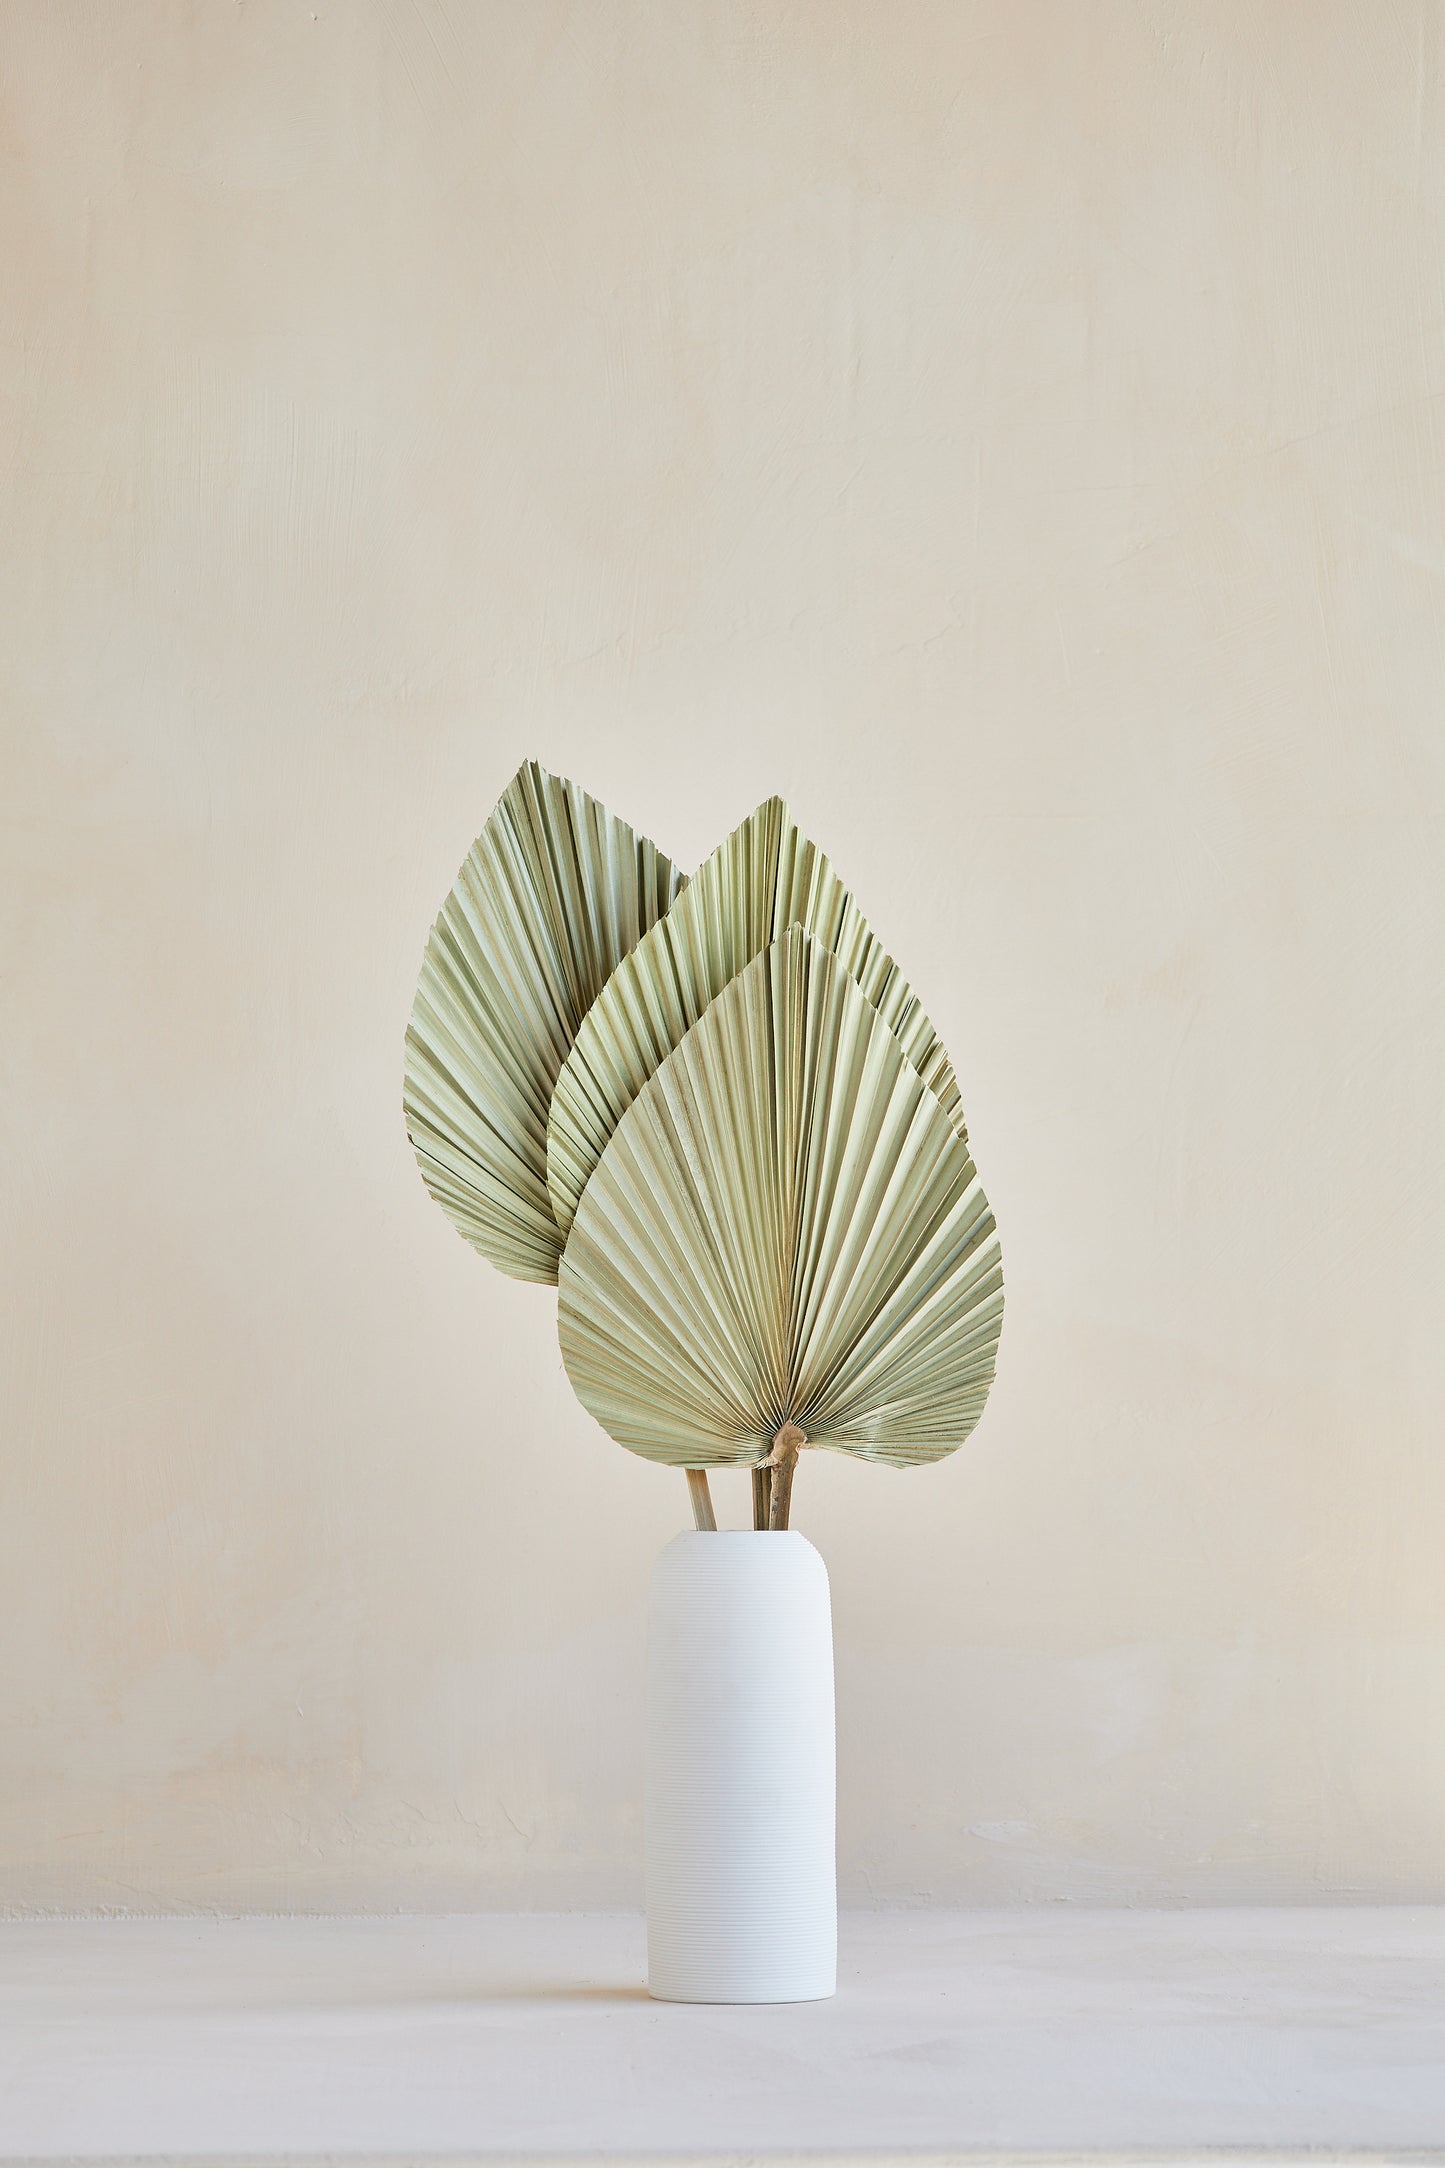 Small Dried Palm Leaves - Set of 3 stems